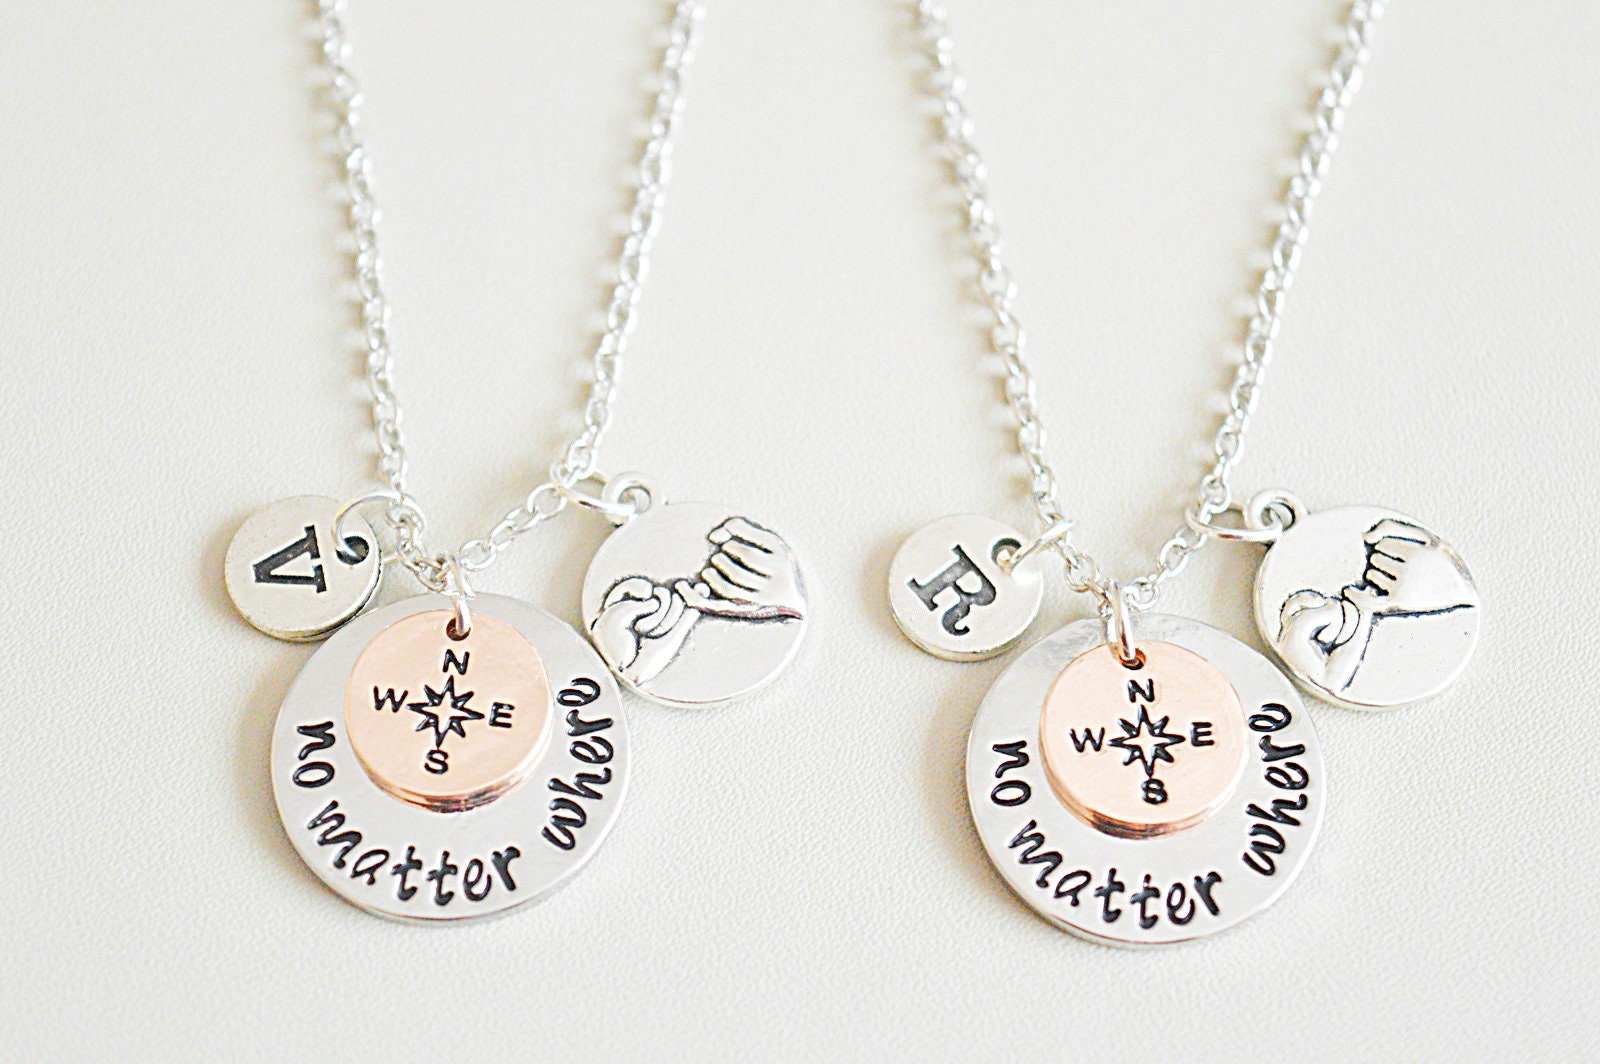 Gift for friends, best friend gifts, best friend necklace for 2, best friend necklace for 3, best friend necklace for 5, Bff